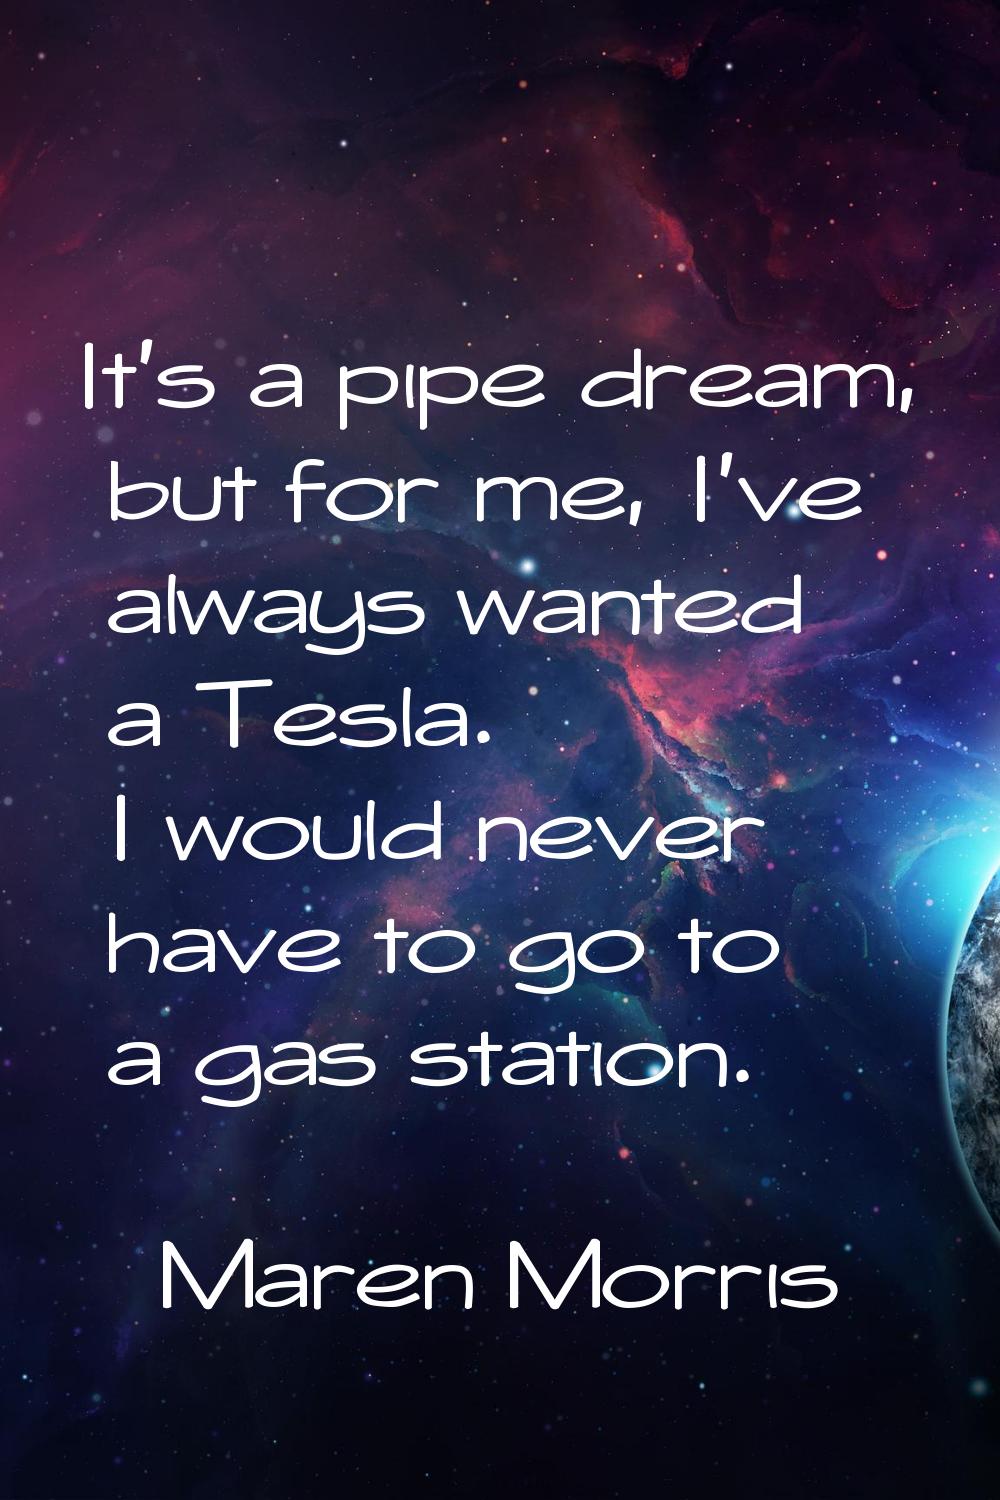 It's a pipe dream, but for me, I've always wanted a Tesla. I would never have to go to a gas statio